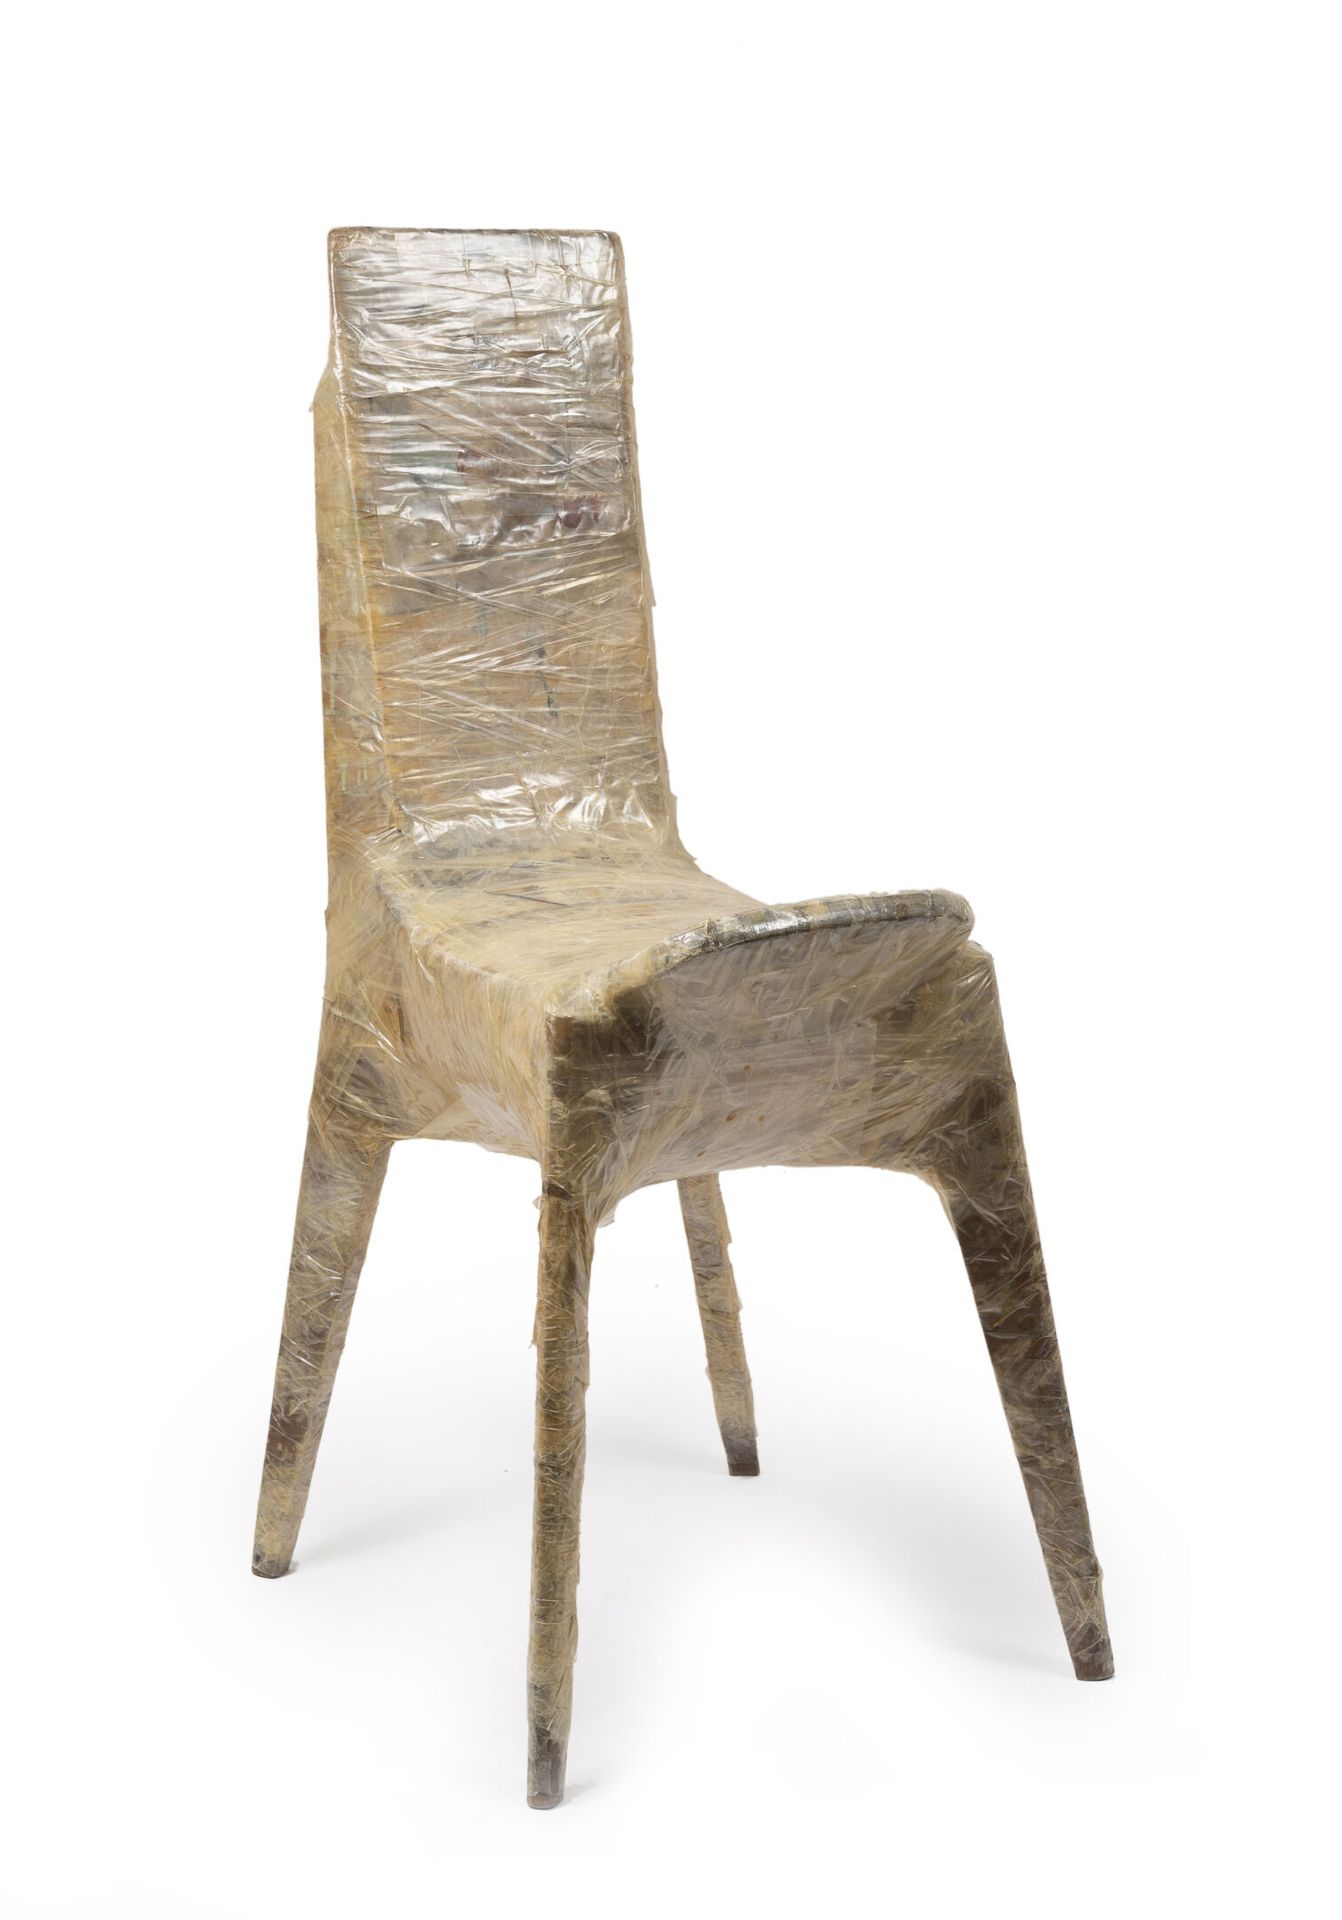 Robin GOLDRING (1963) Untitled, 2002-2011.

Chair.

Mixed media.

Signed and dat&hellip;